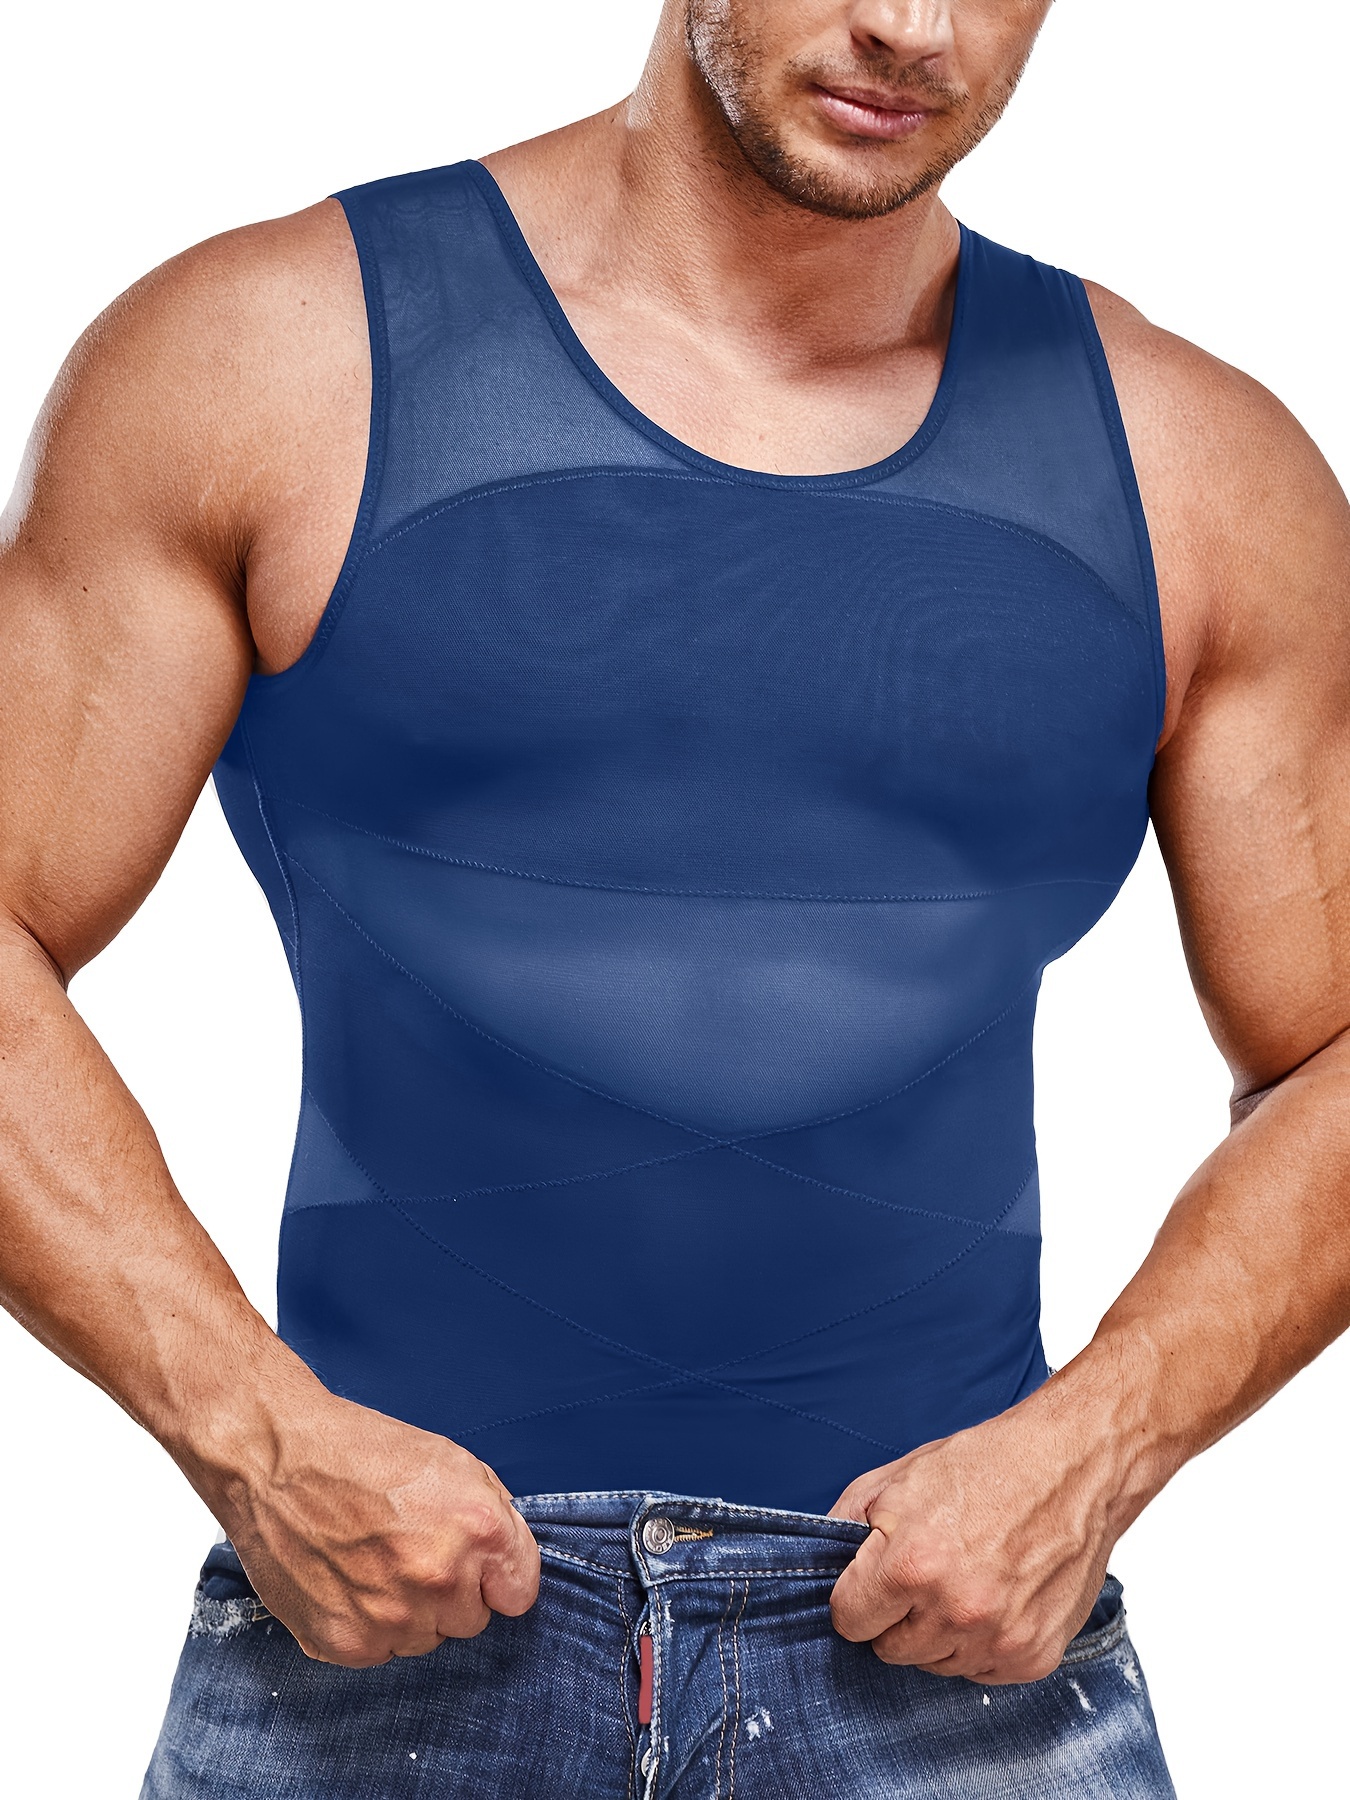 Buy Athmonk Compression T-Shirt Vest Body Shaper Long Sleeve for